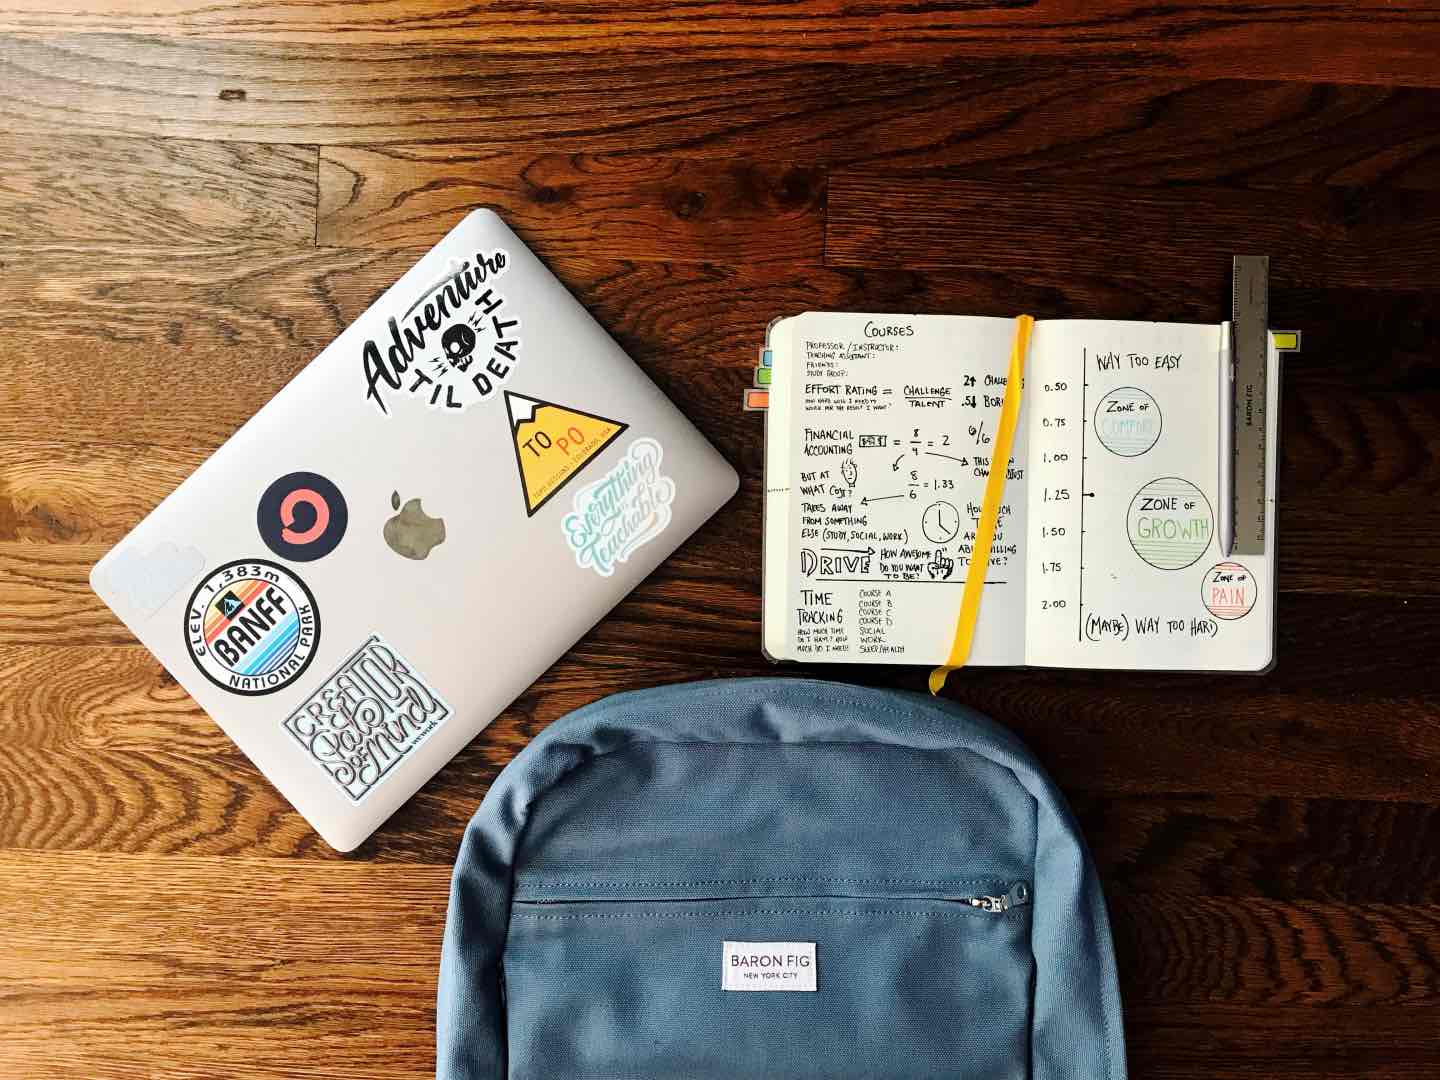 travel with a laptop is worth it!